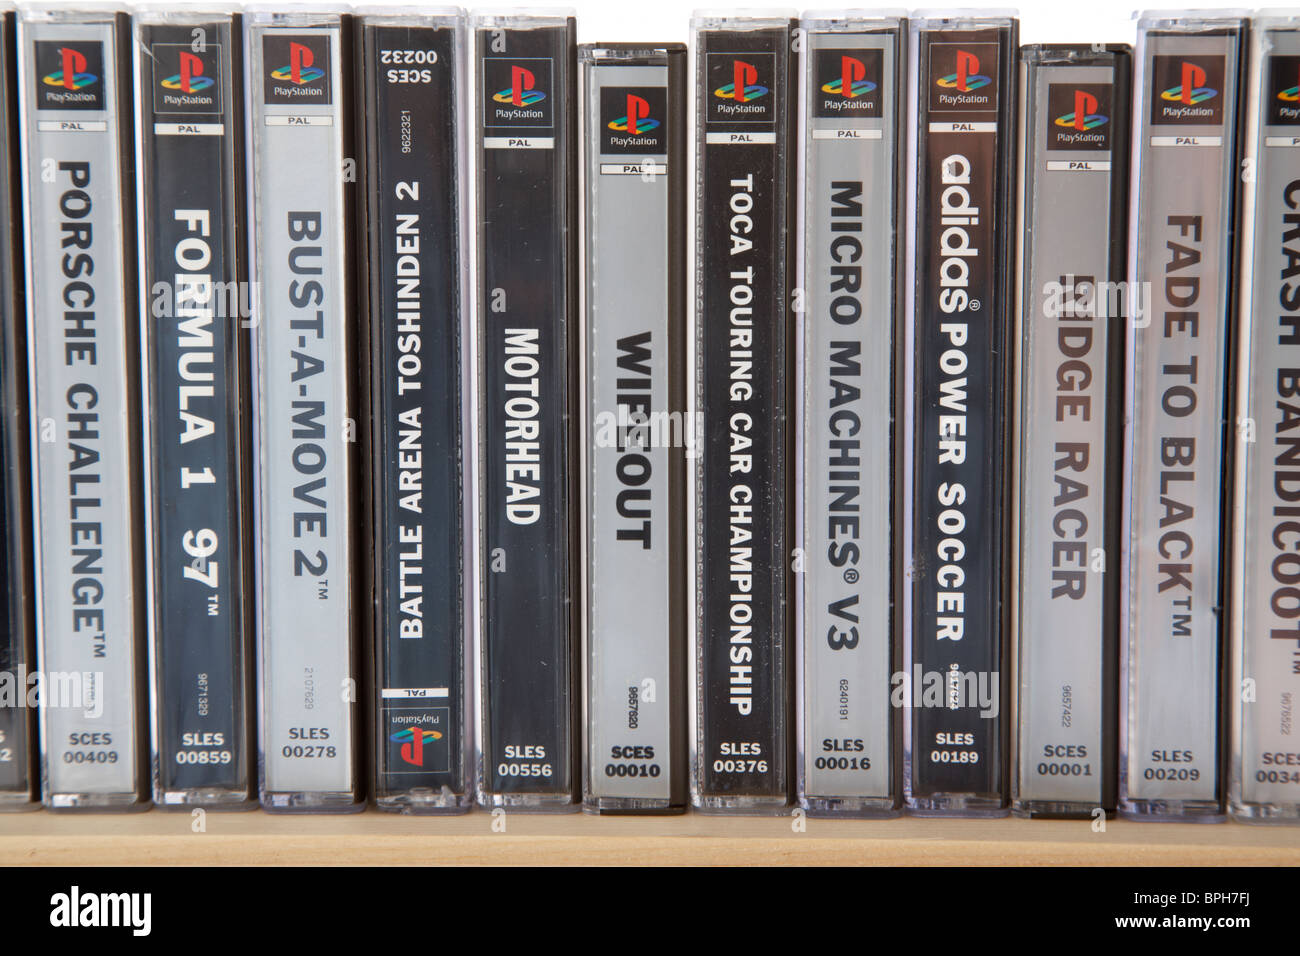 original games for the original playstation console from the 90s Stock Photo